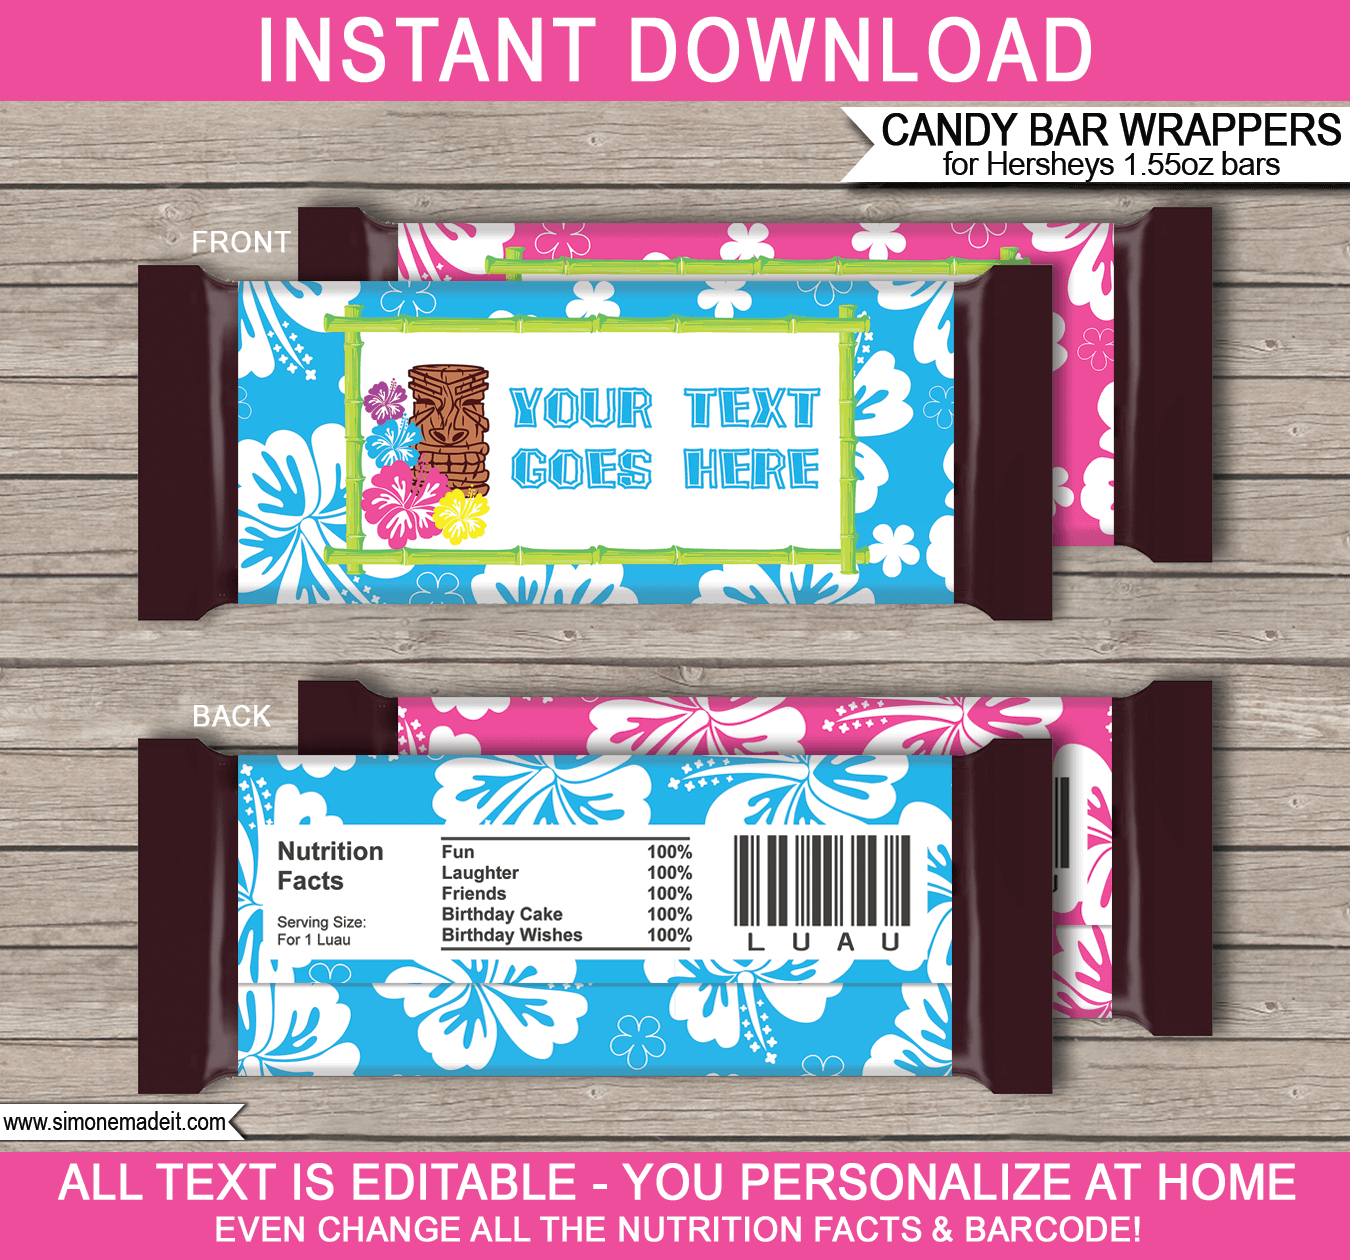 Luau Hershey Candy Bar Wrappers | Personalized Candy Bars - Free Printable Candy Bar Wrappers